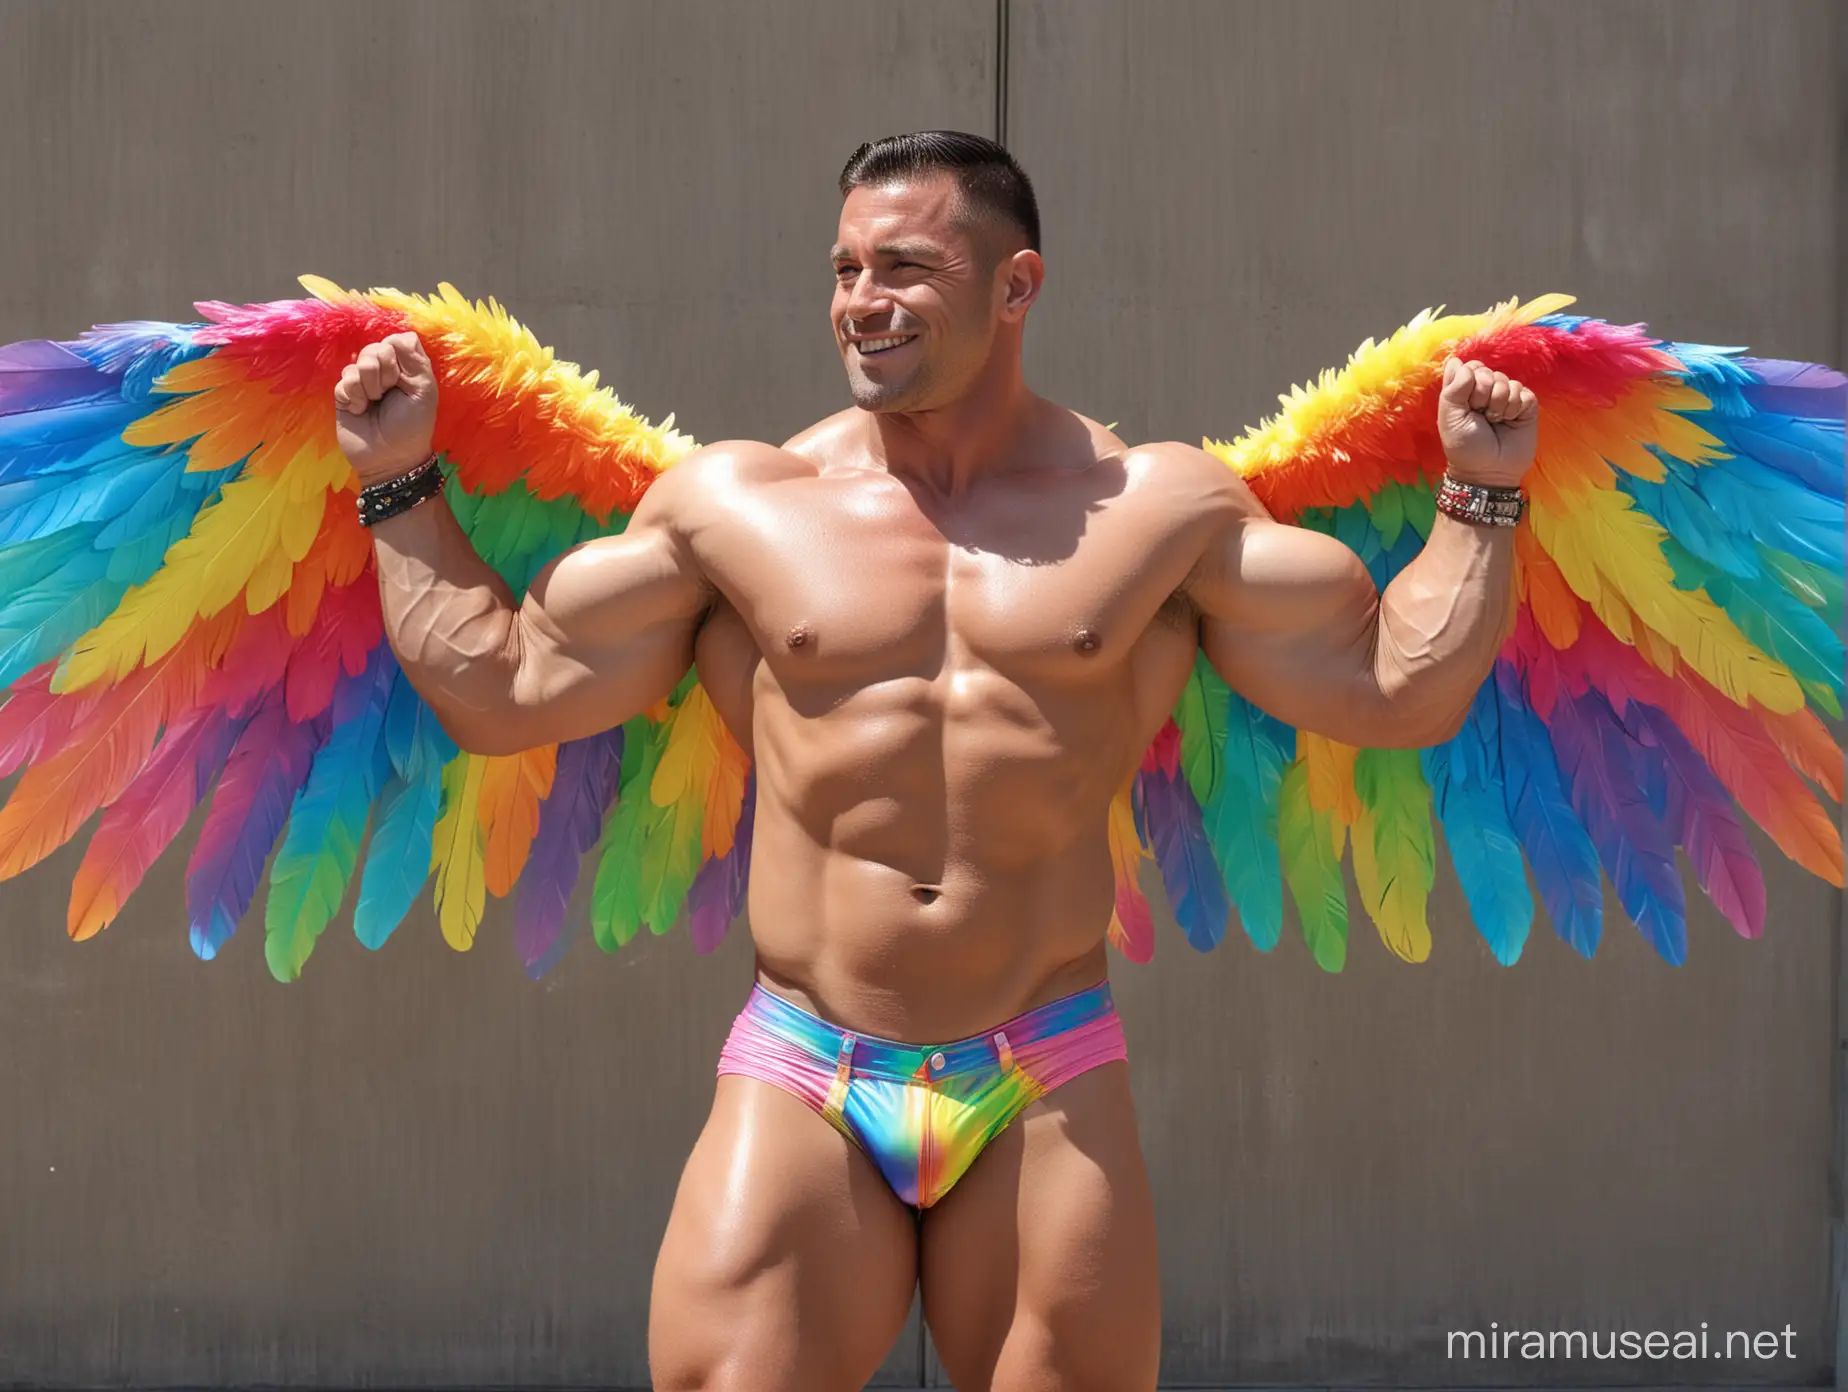 Topless 30s Ultra Beefy IFBB Bodybuilder Man wearing Multi-Highlighter Bright Rainbow Coloured See Through Eagle Wings Jacket short shorts and Flexing Big Strong Arm with Doraemon